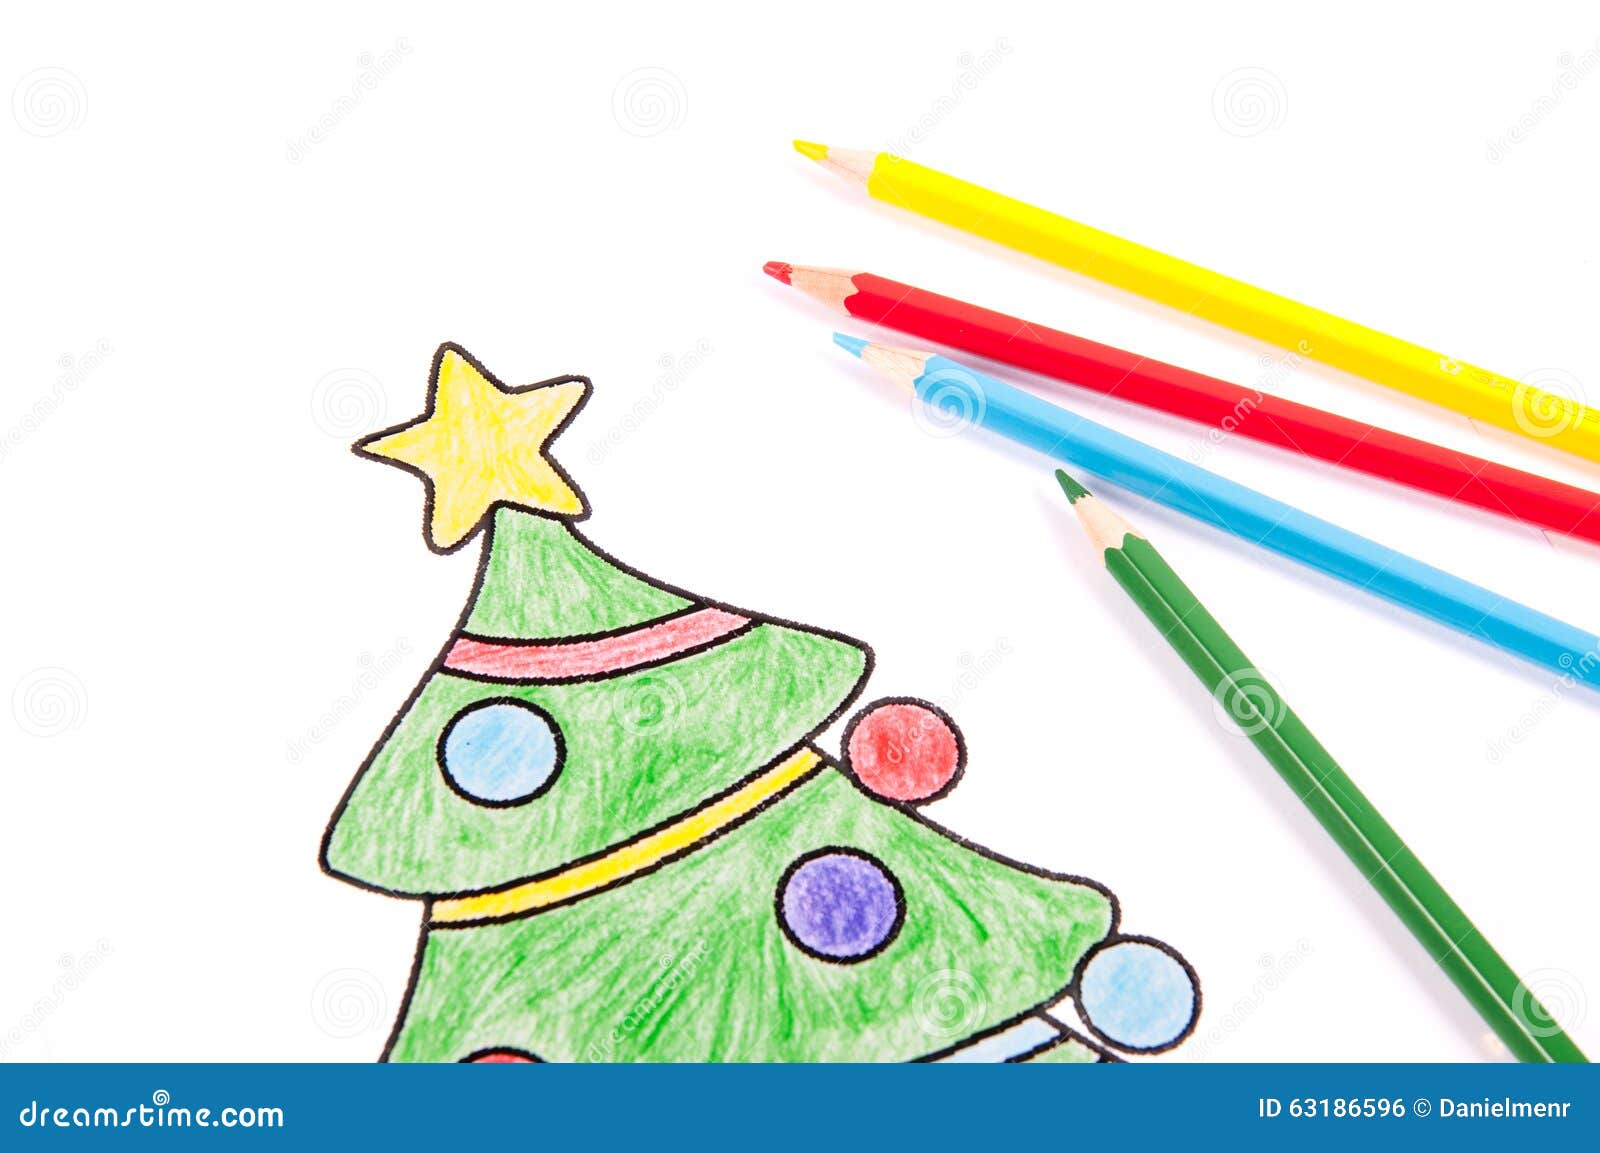 Drawing of a Christmas Tree Stock Photo - Image of paper, merry: 63186596